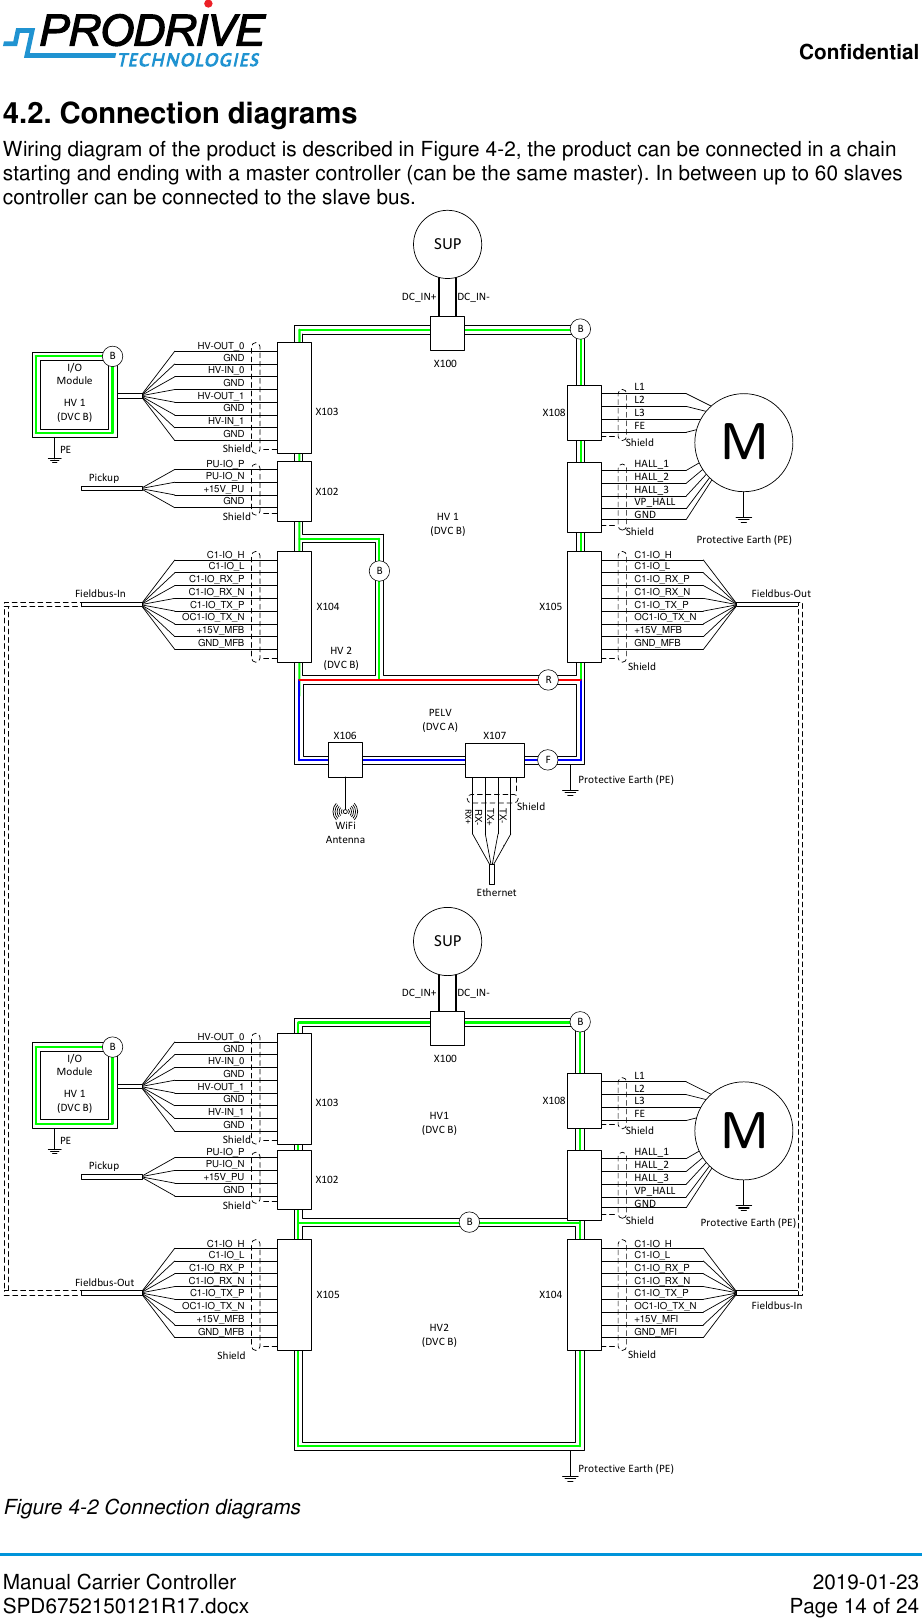 Confidential Manual Carrier Controller  2019-01-23 SPD6752150121R17.docx  Page 14 of 24 4.2. Connection diagrams Wiring diagram of the product is described in Figure 4-2, the product can be connected in a chain starting and ending with a master controller (can be the same master). In between up to 60 slaves controller can be connected to the slave bus. Protective Earth (PE)EthernetPELV(DVC A)FHV1(DVC B)HV2(DVC B)BX108L2ShieldL1L3FEShieldHALL_1HALL_2HALL_3VP_HALLGNDX105MX100DC_IN+DC_IN-SUPShieldC1-IO_HC1-IO_LC1-IO_RX_PC1-IO_RX_NC1-IO_TX_P+15V_MFBGND_MFBOC1-IO_TX_NFieldbus-OutX104ShieldC1-IO_HC1-IO_LC1-IO_RX_PC1-IO_RX_NC1-IO_TX_P+15V_MFBGND_MFBOC1-IO_TX_NFieldbus-InHV 1(DVC B)HV 2(DVC B)ShieldPU-IO_PPU-IO_N+15V_PUGNDPickupProtective Earth (PE)X102BBRX107X106WiFi AntennaRX+RX-TX+TX-Protective Earth (PE)X108L2ShieldL1L3FEShieldHALL_1HALL_2HALL_3VP_HALLGNDX104MX100DC_IN+DC_IN-SUPShieldC1-IO_HC1-IO_LC1-IO_RX_PC1-IO_RX_NC1-IO_TX_P+15V_MFIGND_MFIOC1-IO_TX_N Fieldbus-InX105C1-IO_HC1-IO_LC1-IO_RX_PC1-IO_RX_NC1-IO_TX_P+15V_MFBGND_MFBOC1-IO_TX_NFieldbus-OutShieldPU-IO_PPU-IO_N+15V_PUGNDPickupX102HV 1(DVC B)I/OModuleBX103PEBProtective Earth (PE)ShieldHV-OUT_0GNDHV-IN_0GNDHV-OUT_1HV-IN_1GNDGNDShieldHV 1(DVC B)I/OModuleBX103PEHV-OUT_0GNDHV-IN_0GNDHV-OUT_1HV-IN_1GNDGNDShield Figure 4-2 Connection diagrams 